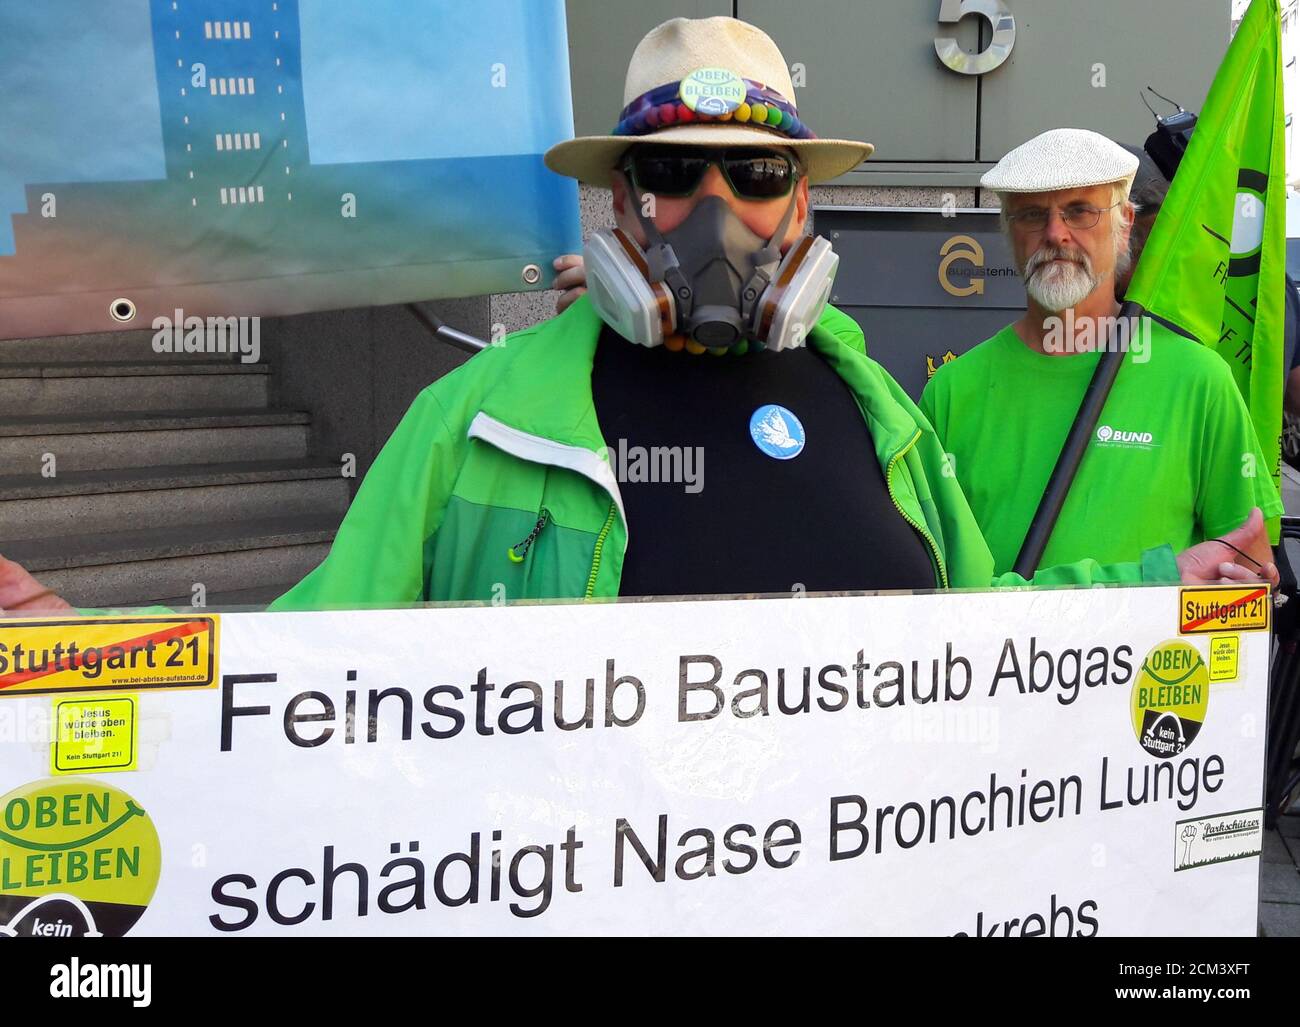 Protesters demonstrate against pollution in front of a court in Stuttgart, Germany, July 19, 2017. Placard reads 'Particular matter pollution, builders dust, exhaust harm nose, bronchia, lung'. REUTERS/Ilona Wissenbach Stock Photo